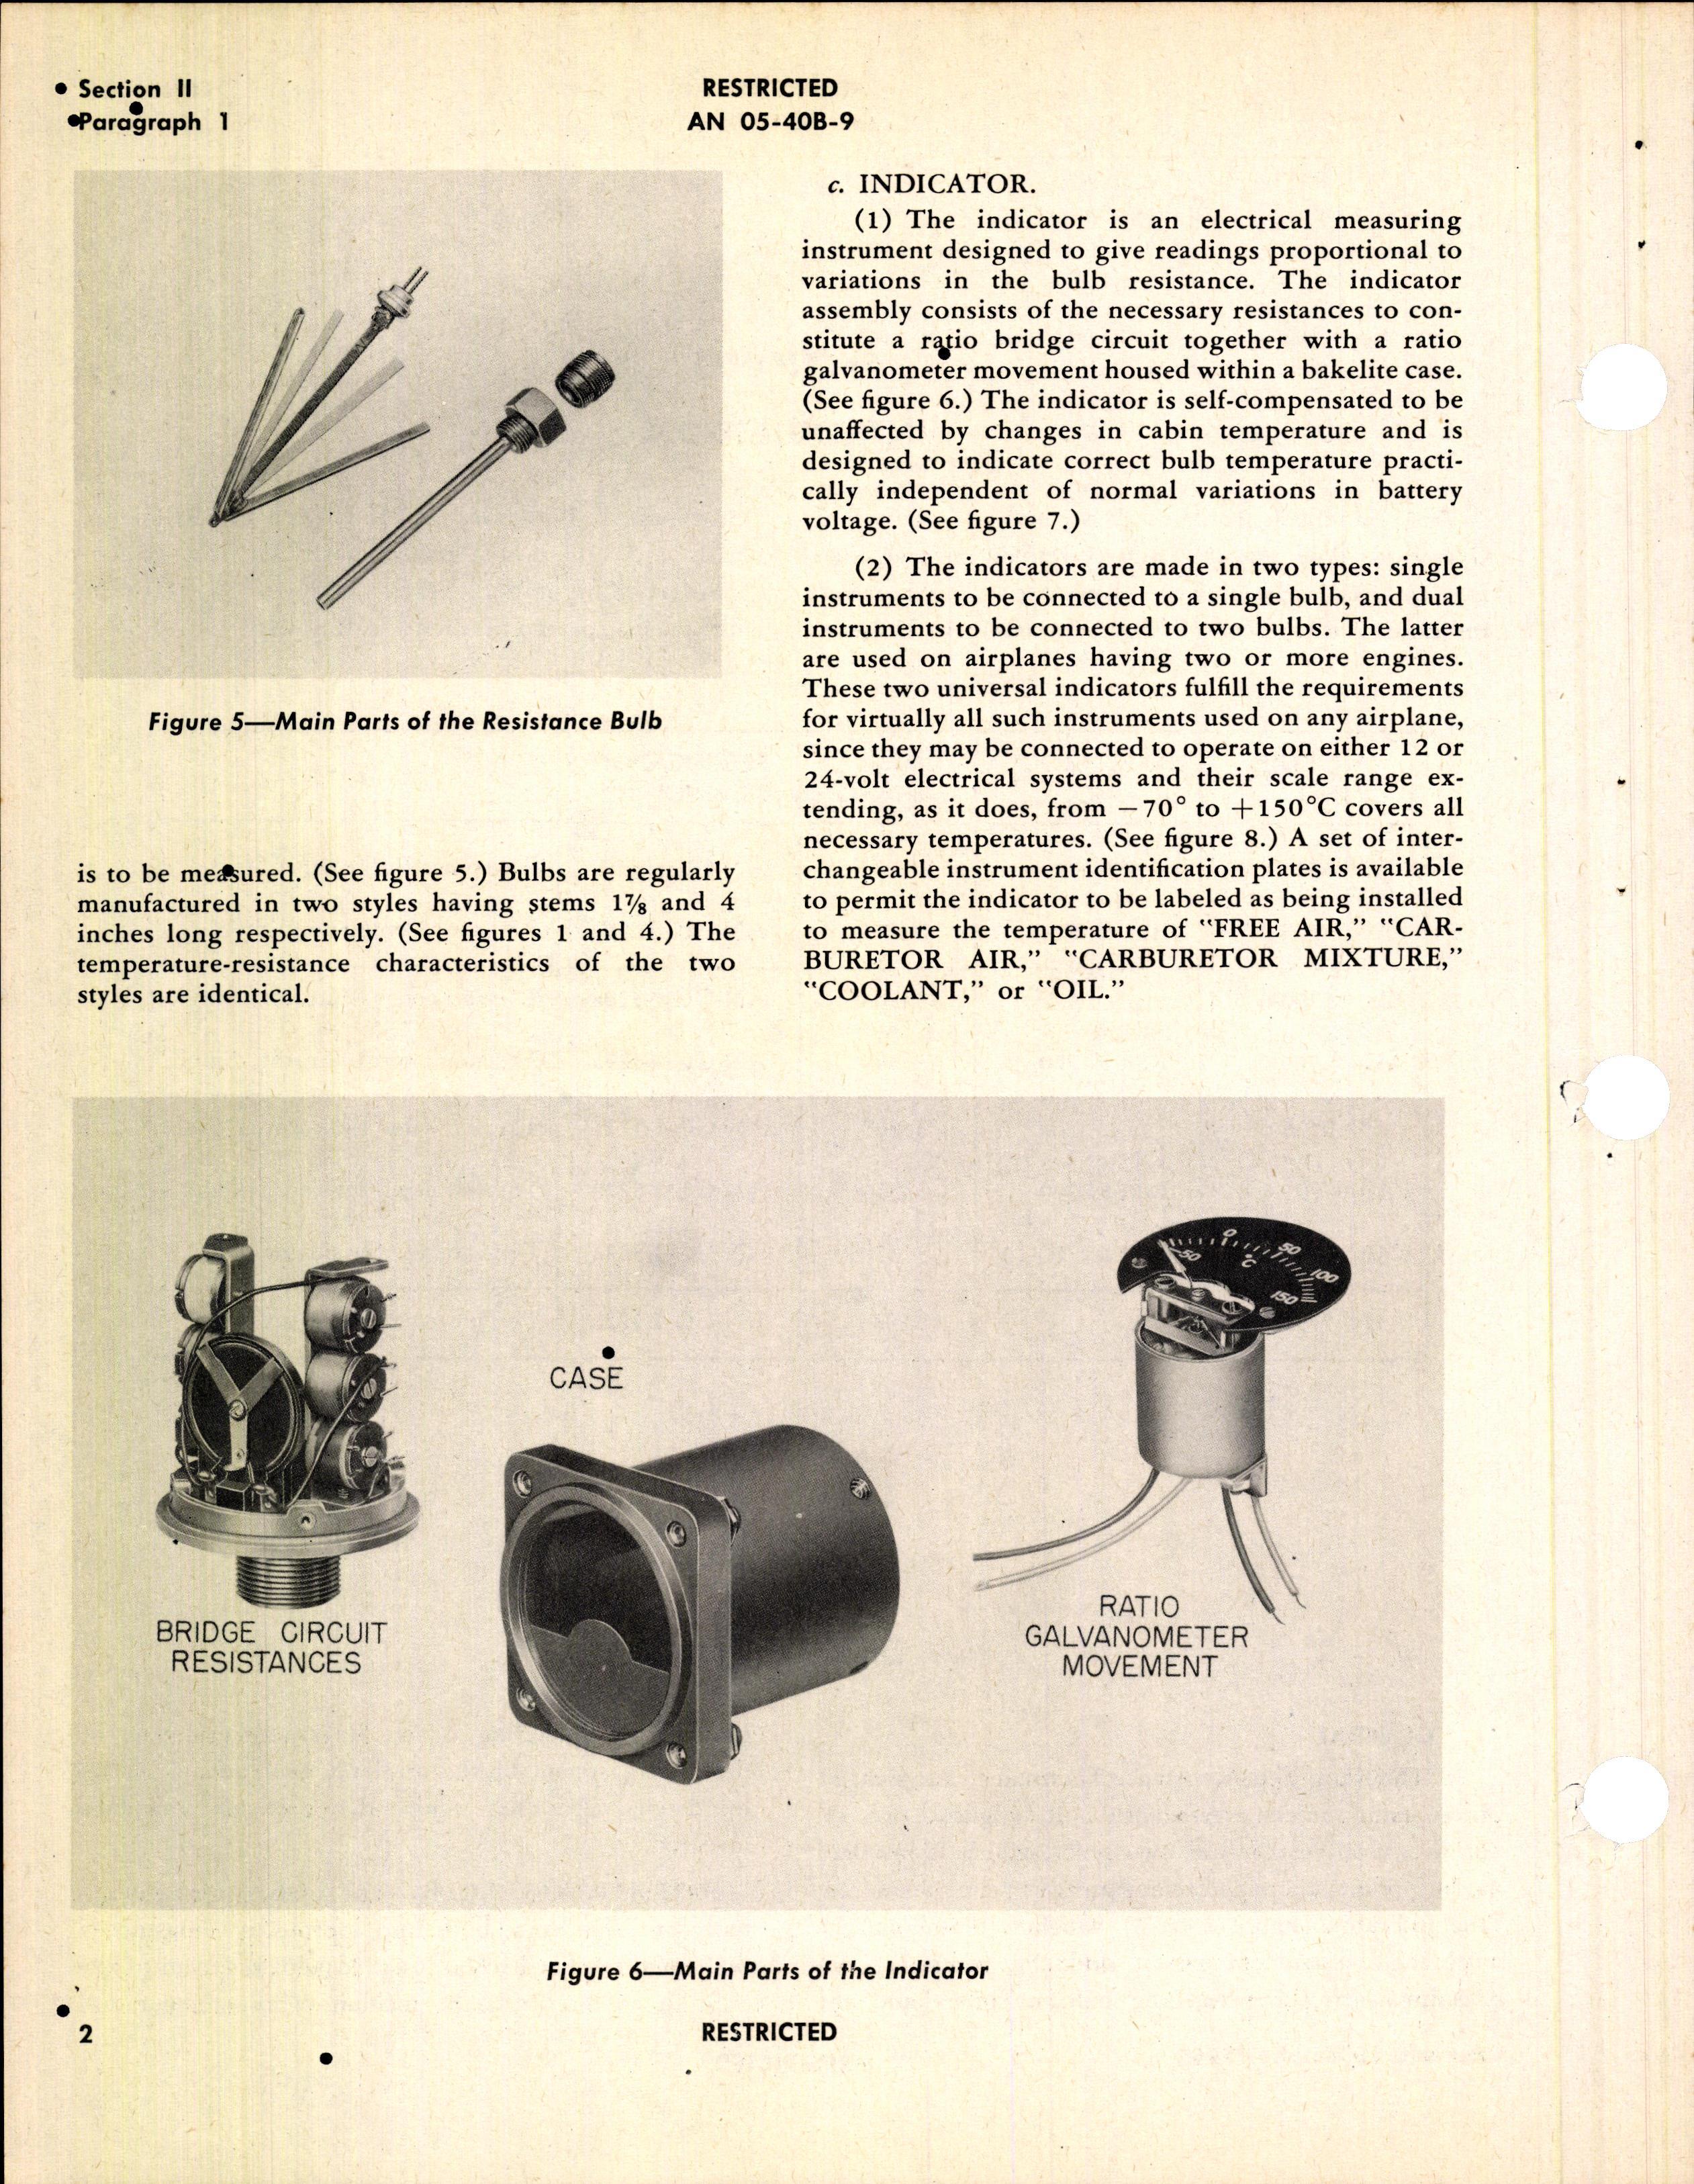 Sample page 8 from AirCorps Library document: Operation, Service, & Overhaul Instructions with Parts Catalog for Thermometer Indicators